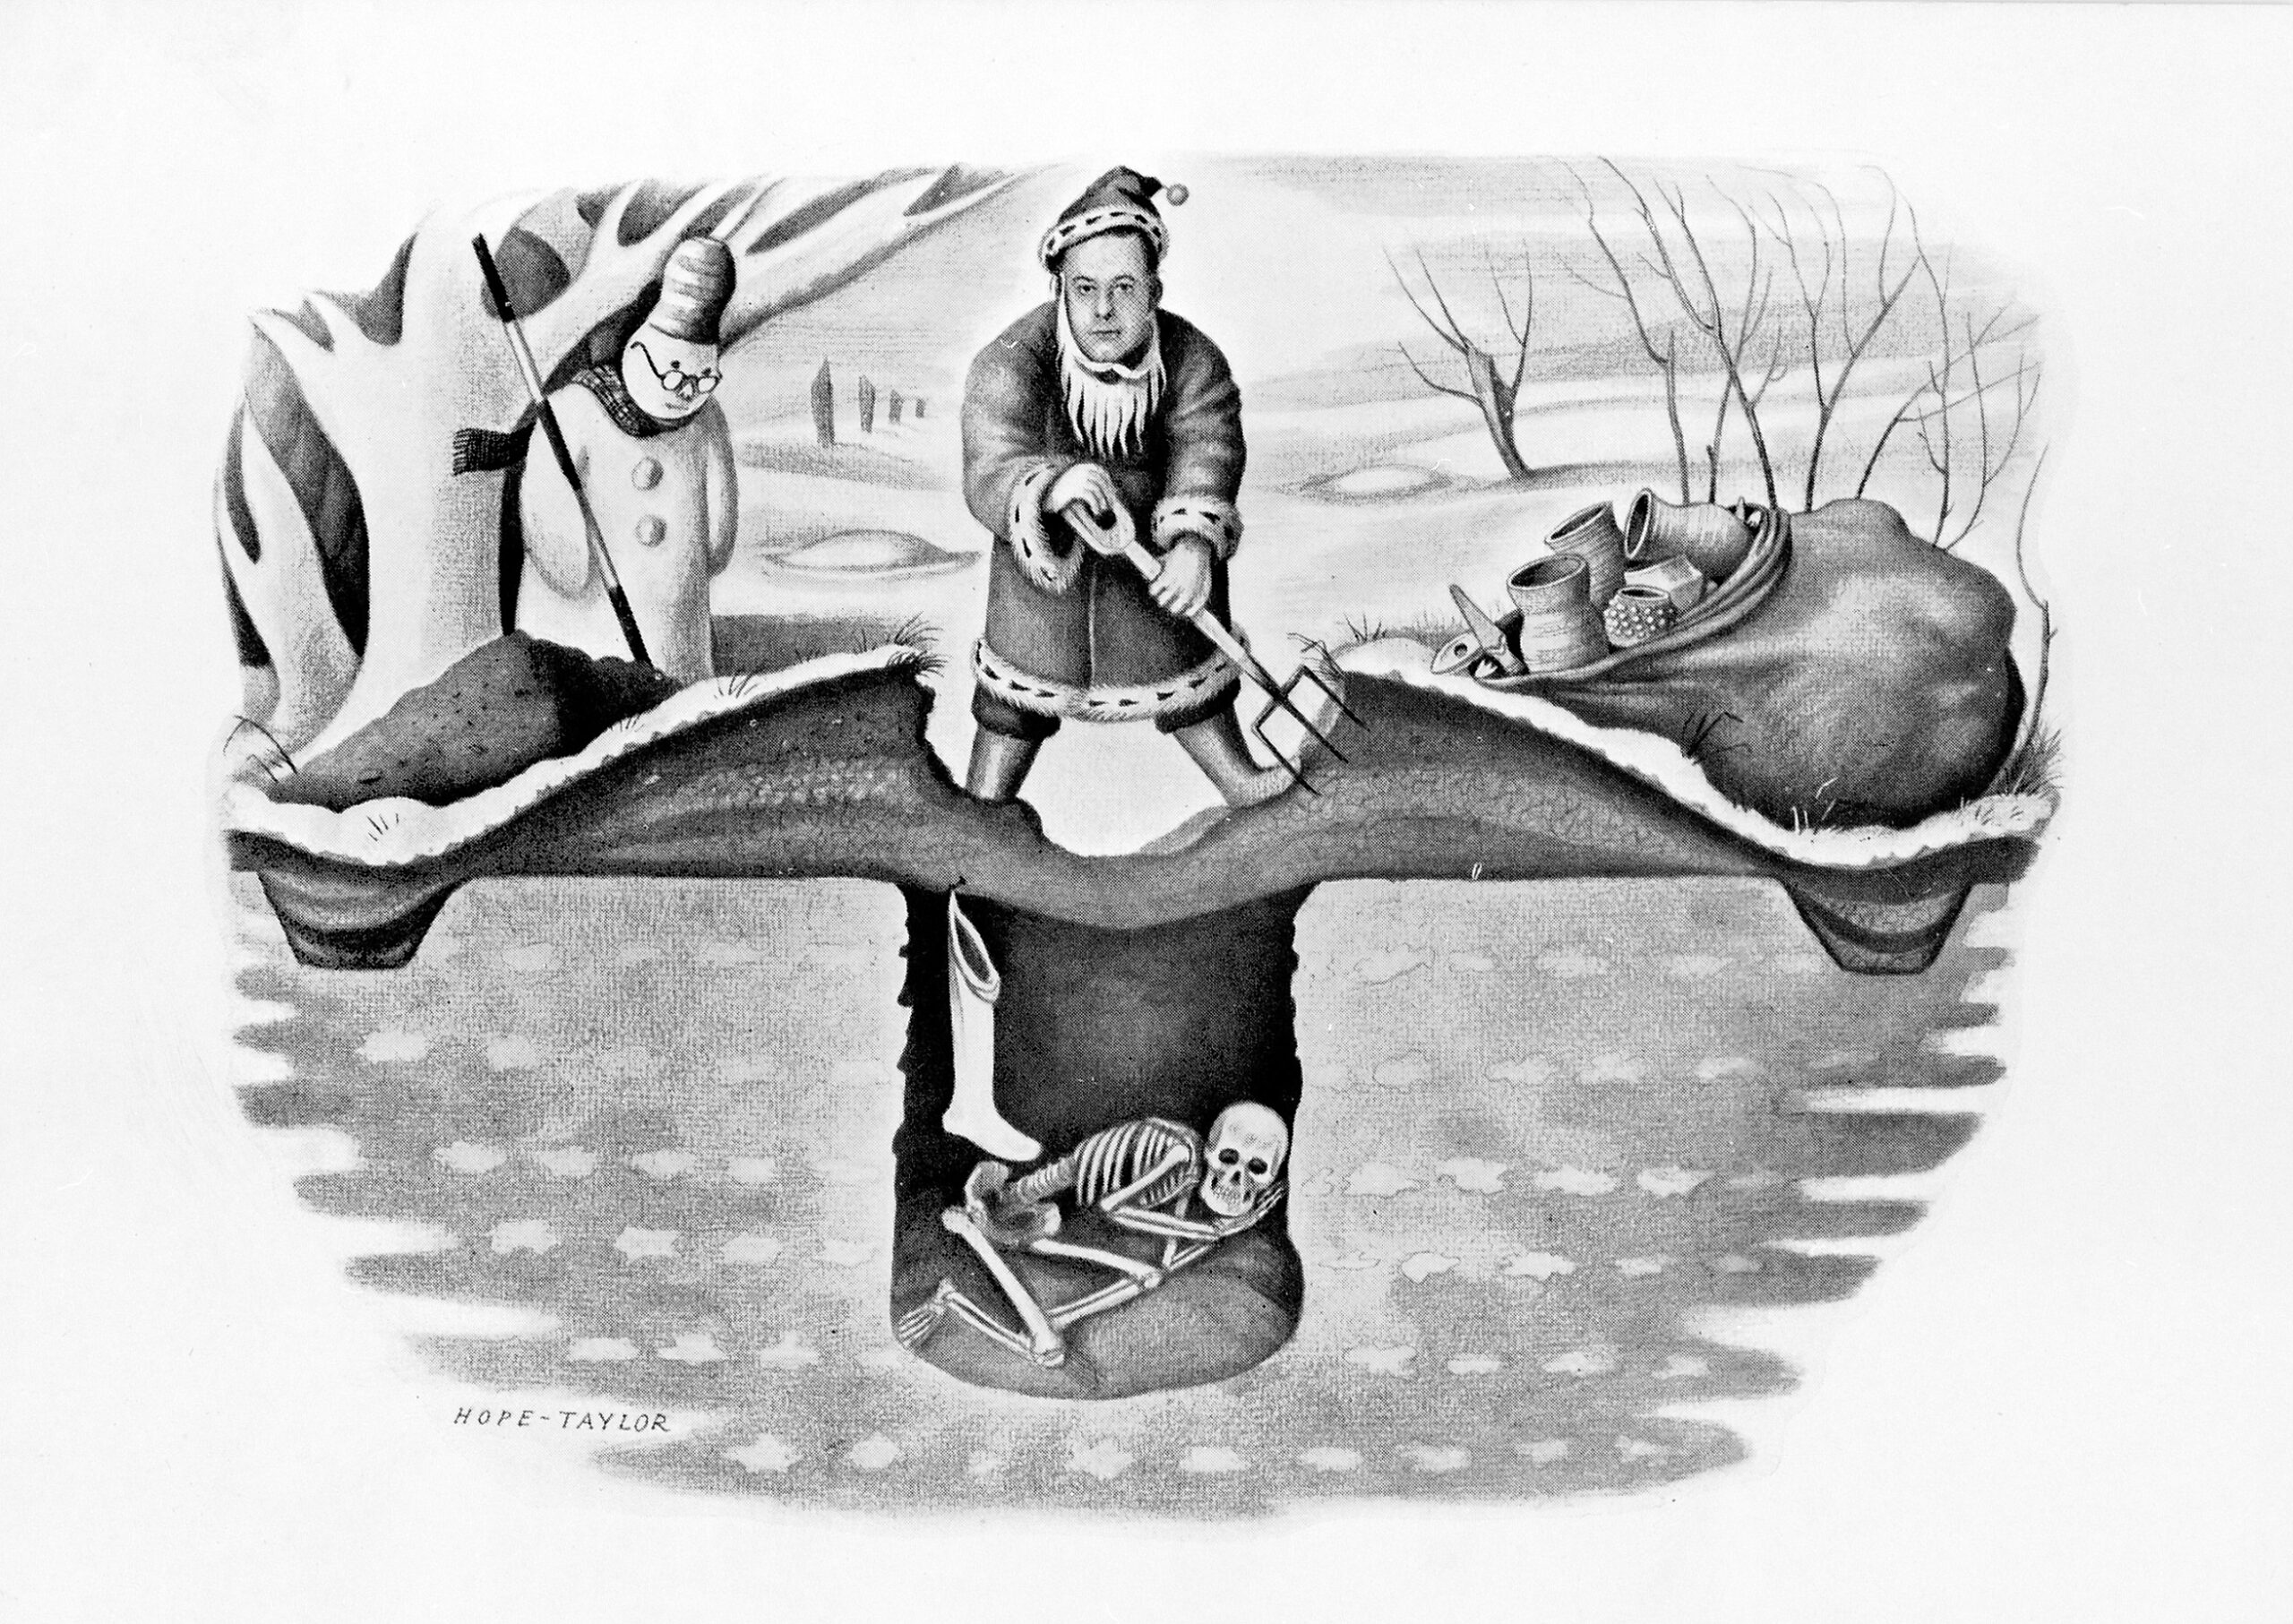 A man dressed as Santa Claus can be seen excavating a burial mound with a sack full, with archaeological artefacts. You can see a skeleton under the ground and a snowman watching the scene.